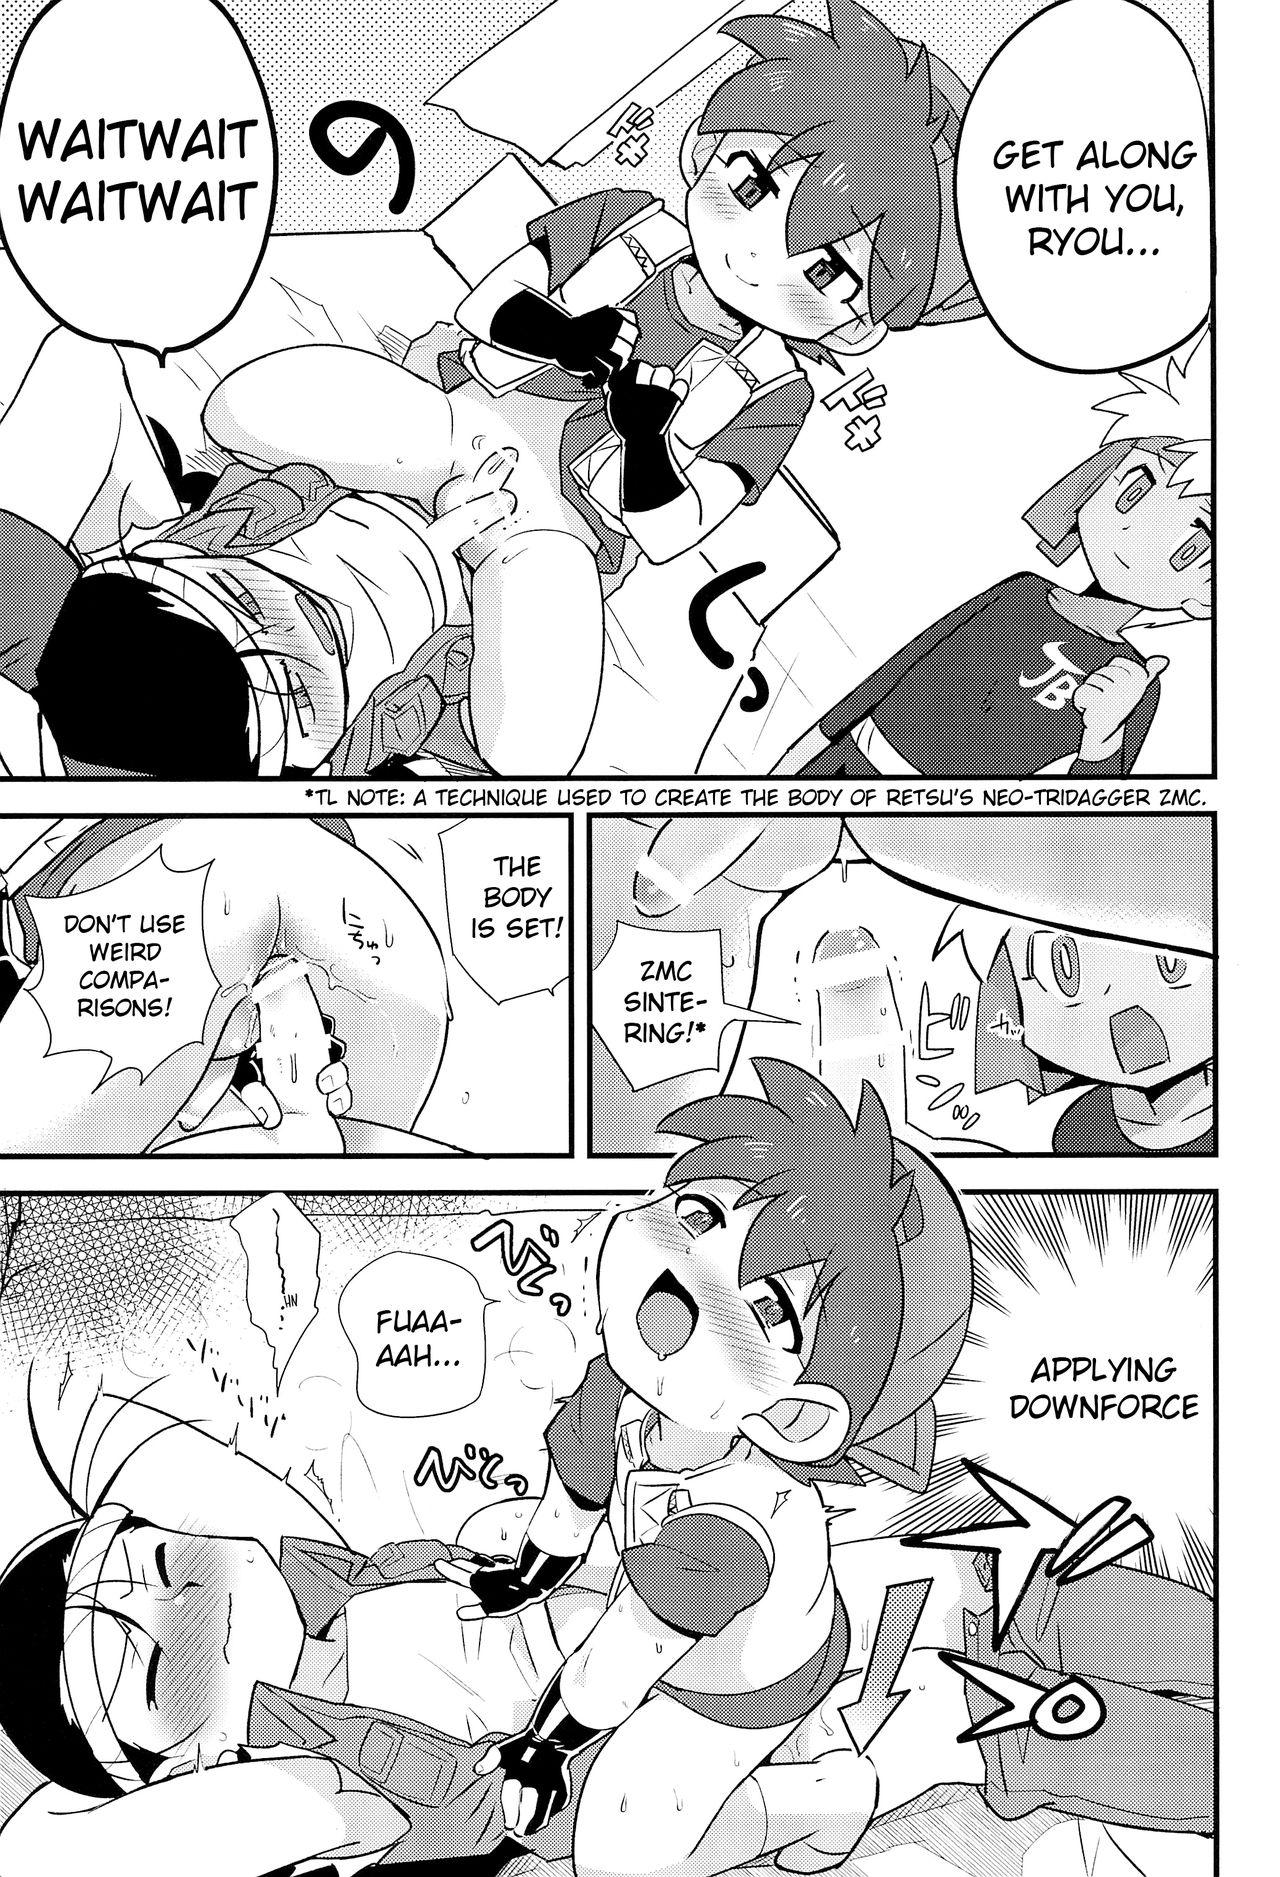 Caught Try Shichau? | Wanna Try It? - Bakusou kyoudai lets and go Underwear - Page 12